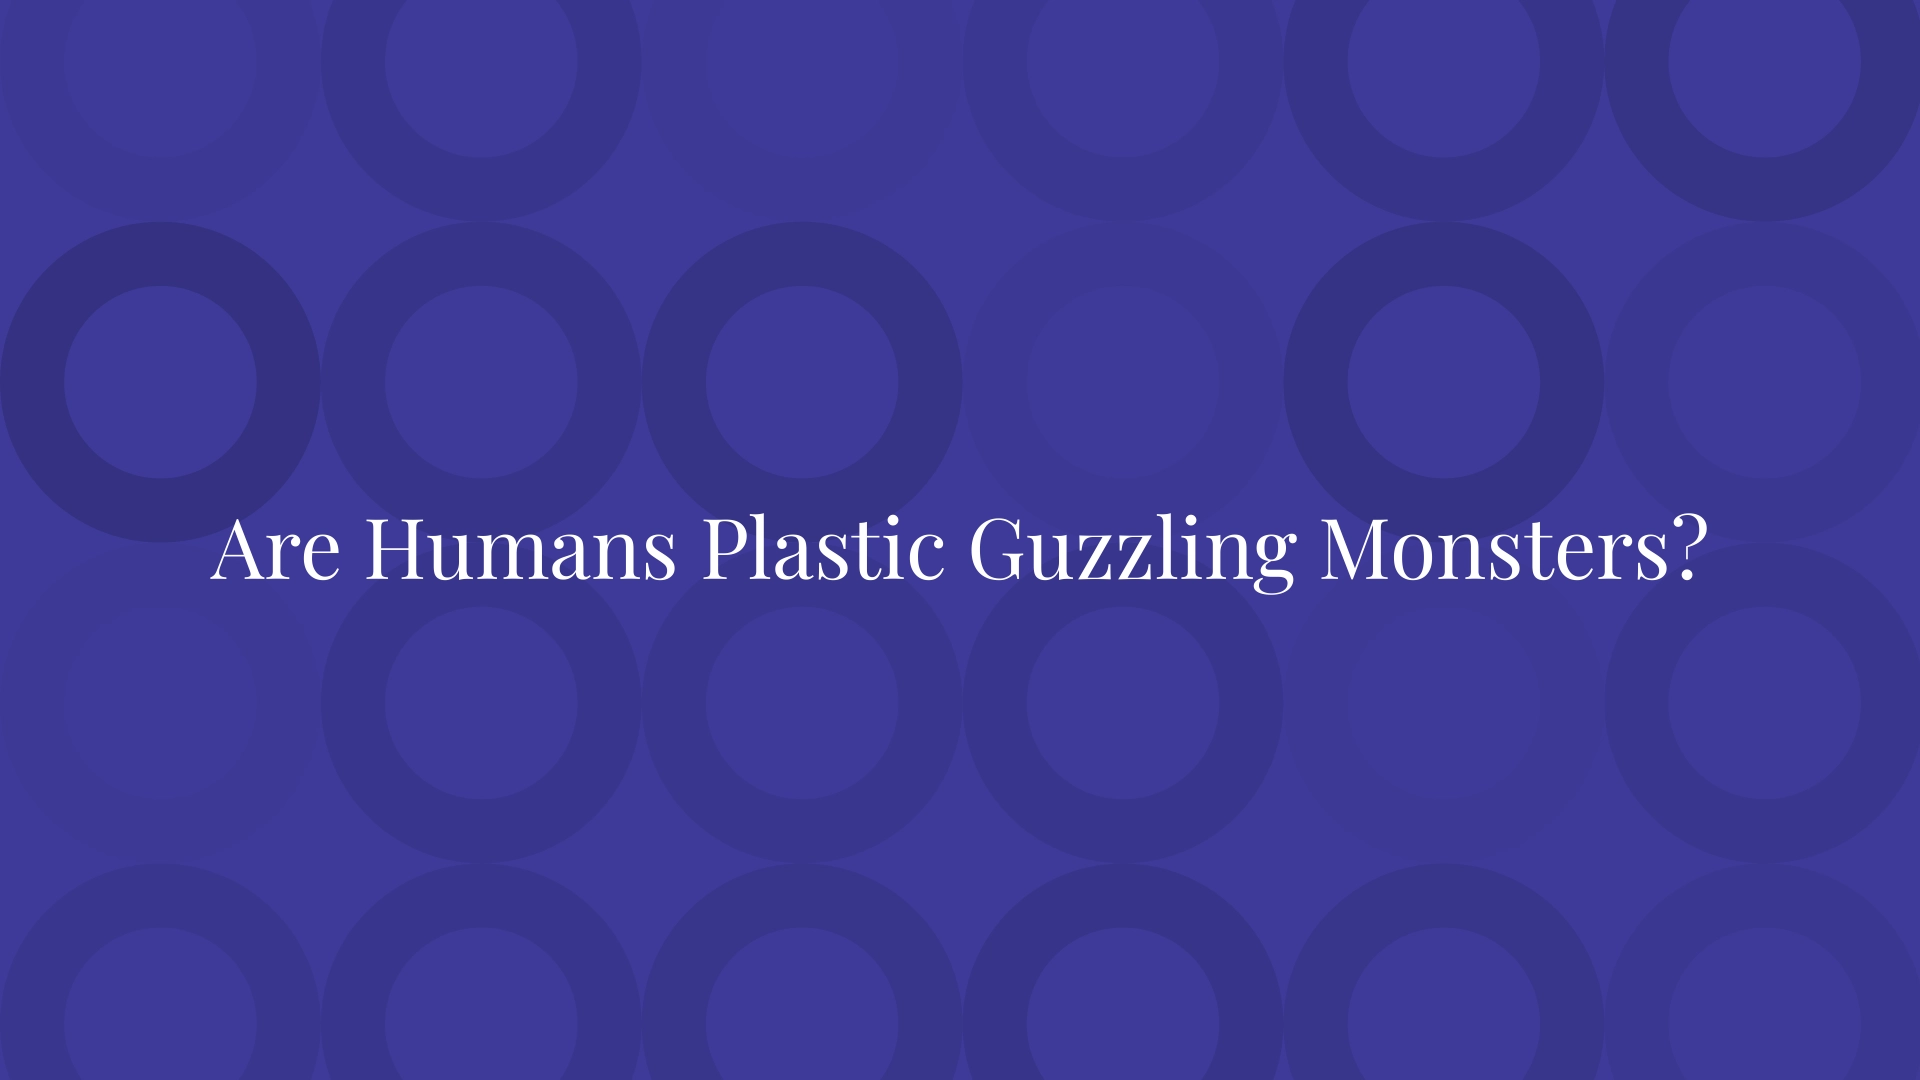 Are Humans Plastic Guzzling Monsters?